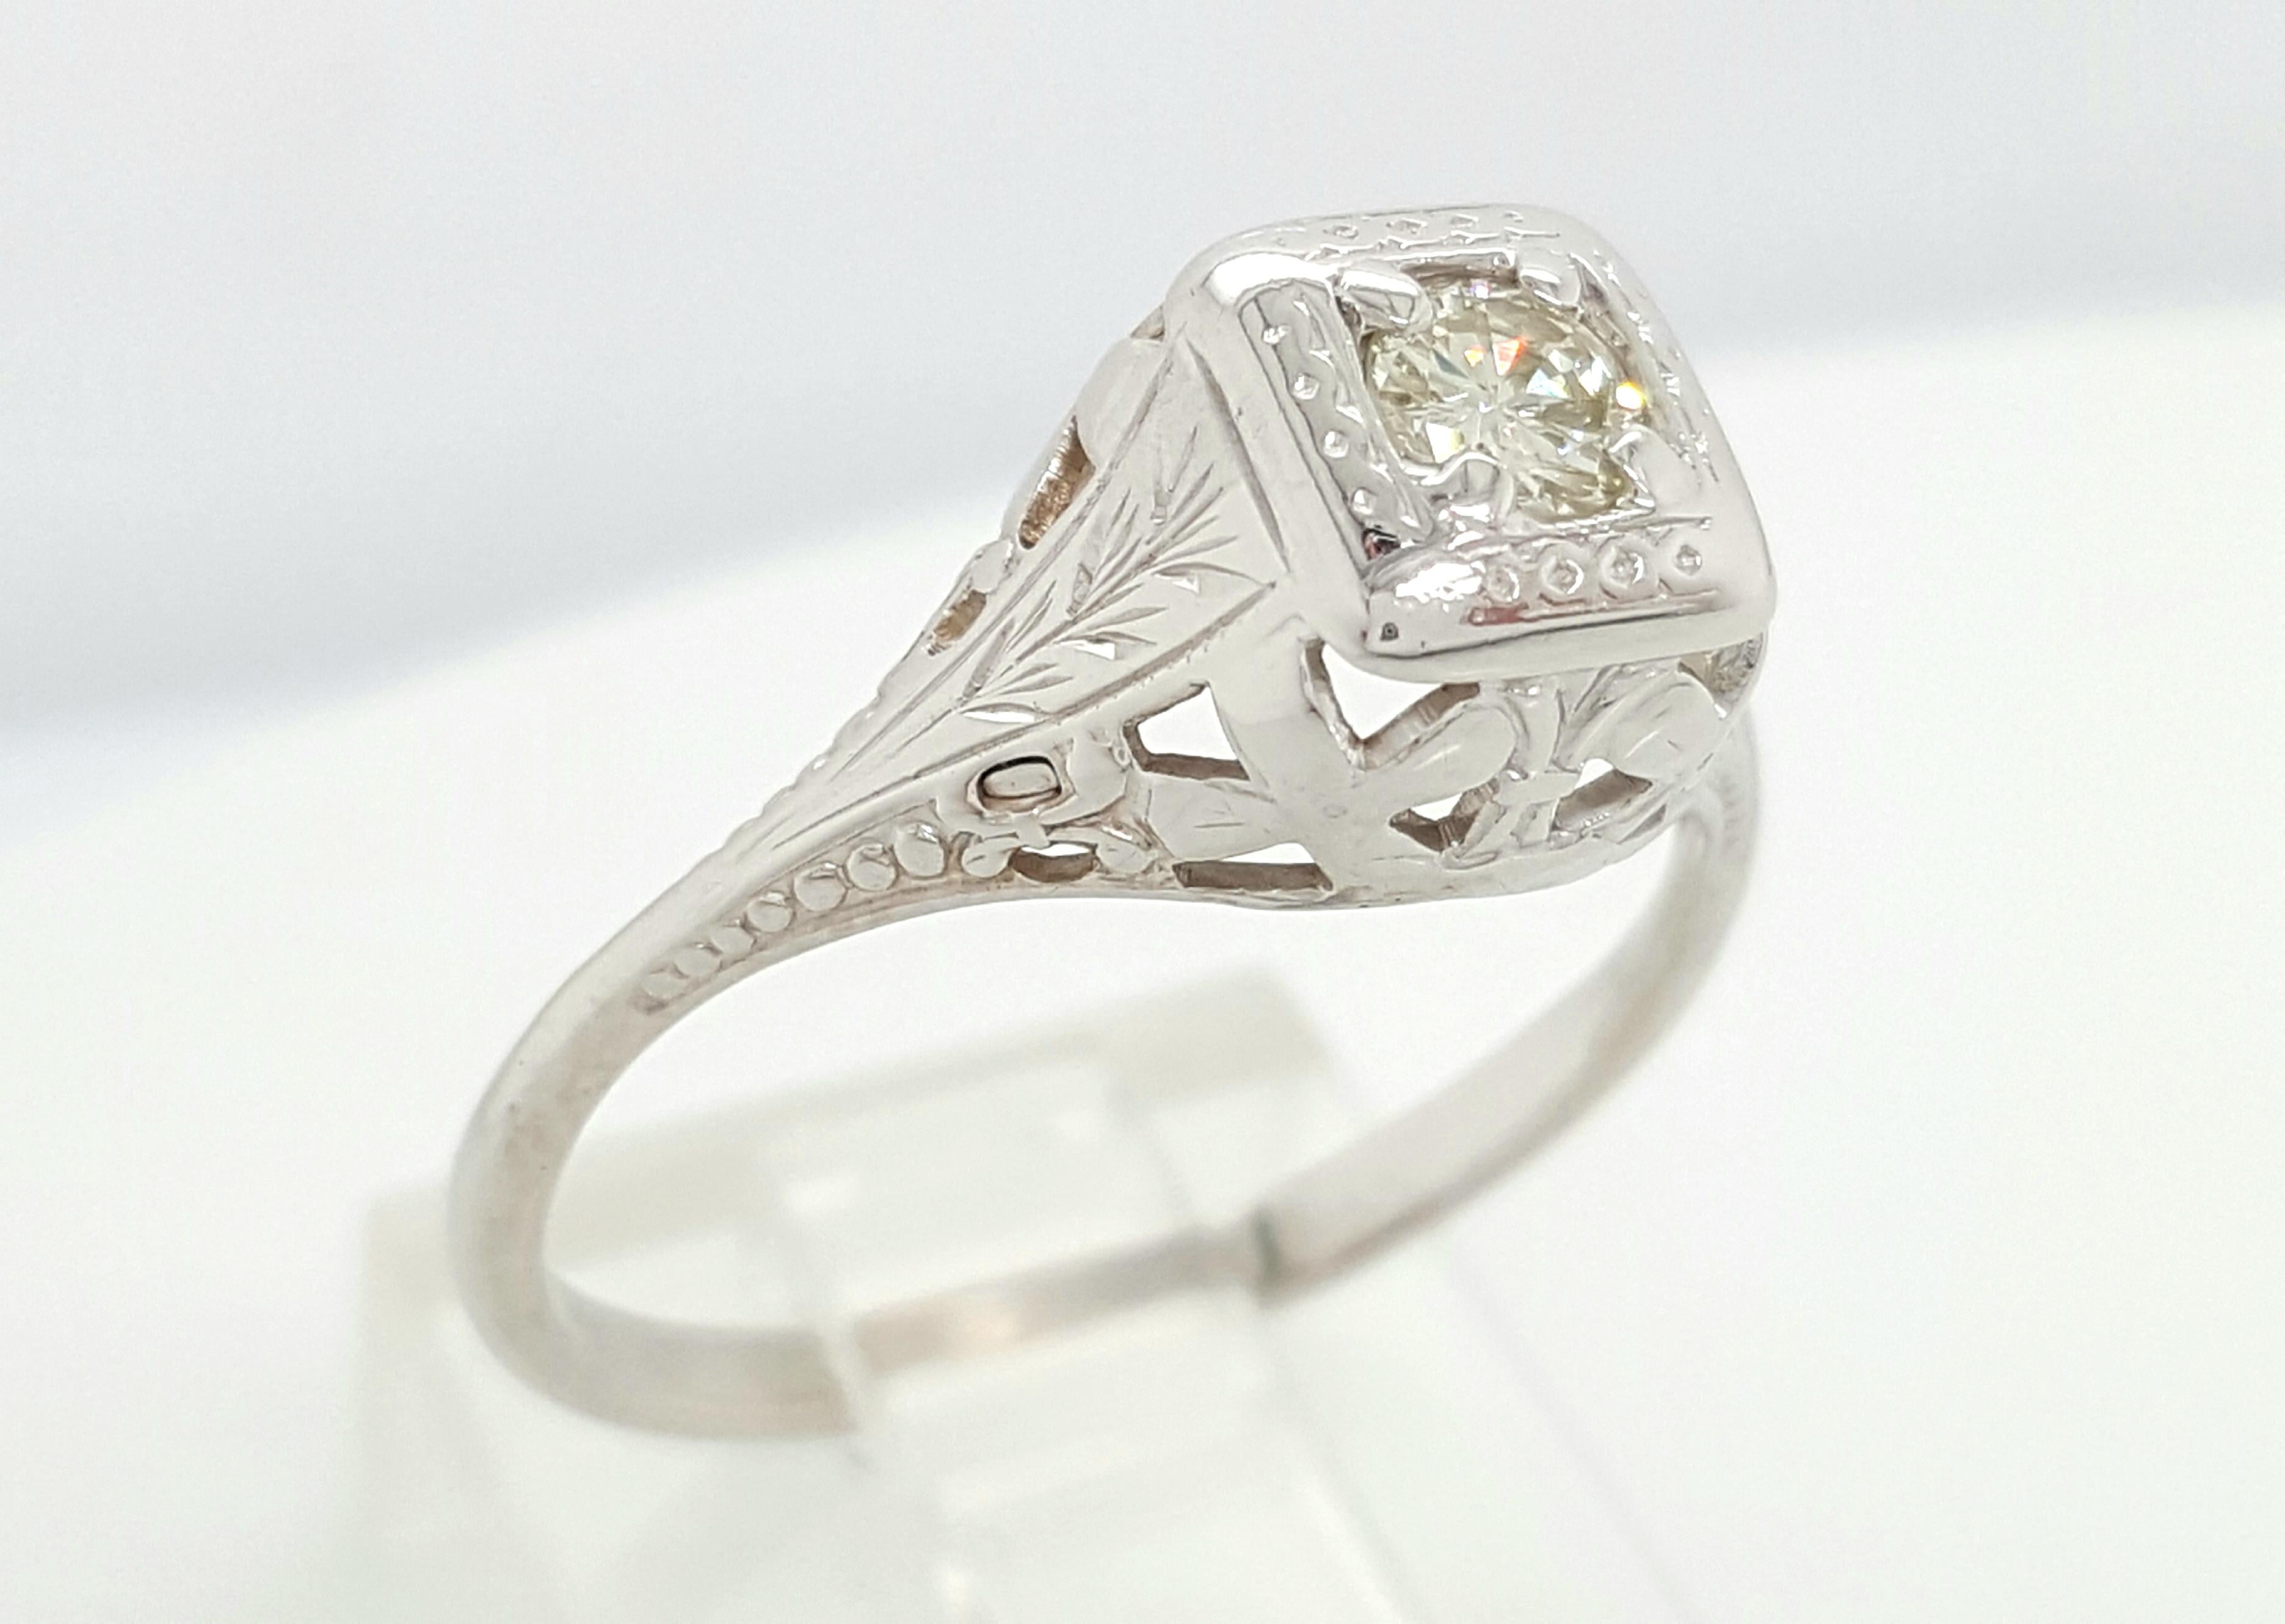 This Art Deco solitaire is a fine example of a filigree solitaire engagement ring crafted in 14 karat white gold. The Round Cut cut diamond is held high in four prongs showcasing the solitaire from all sides! Flowing down from the sparkling center